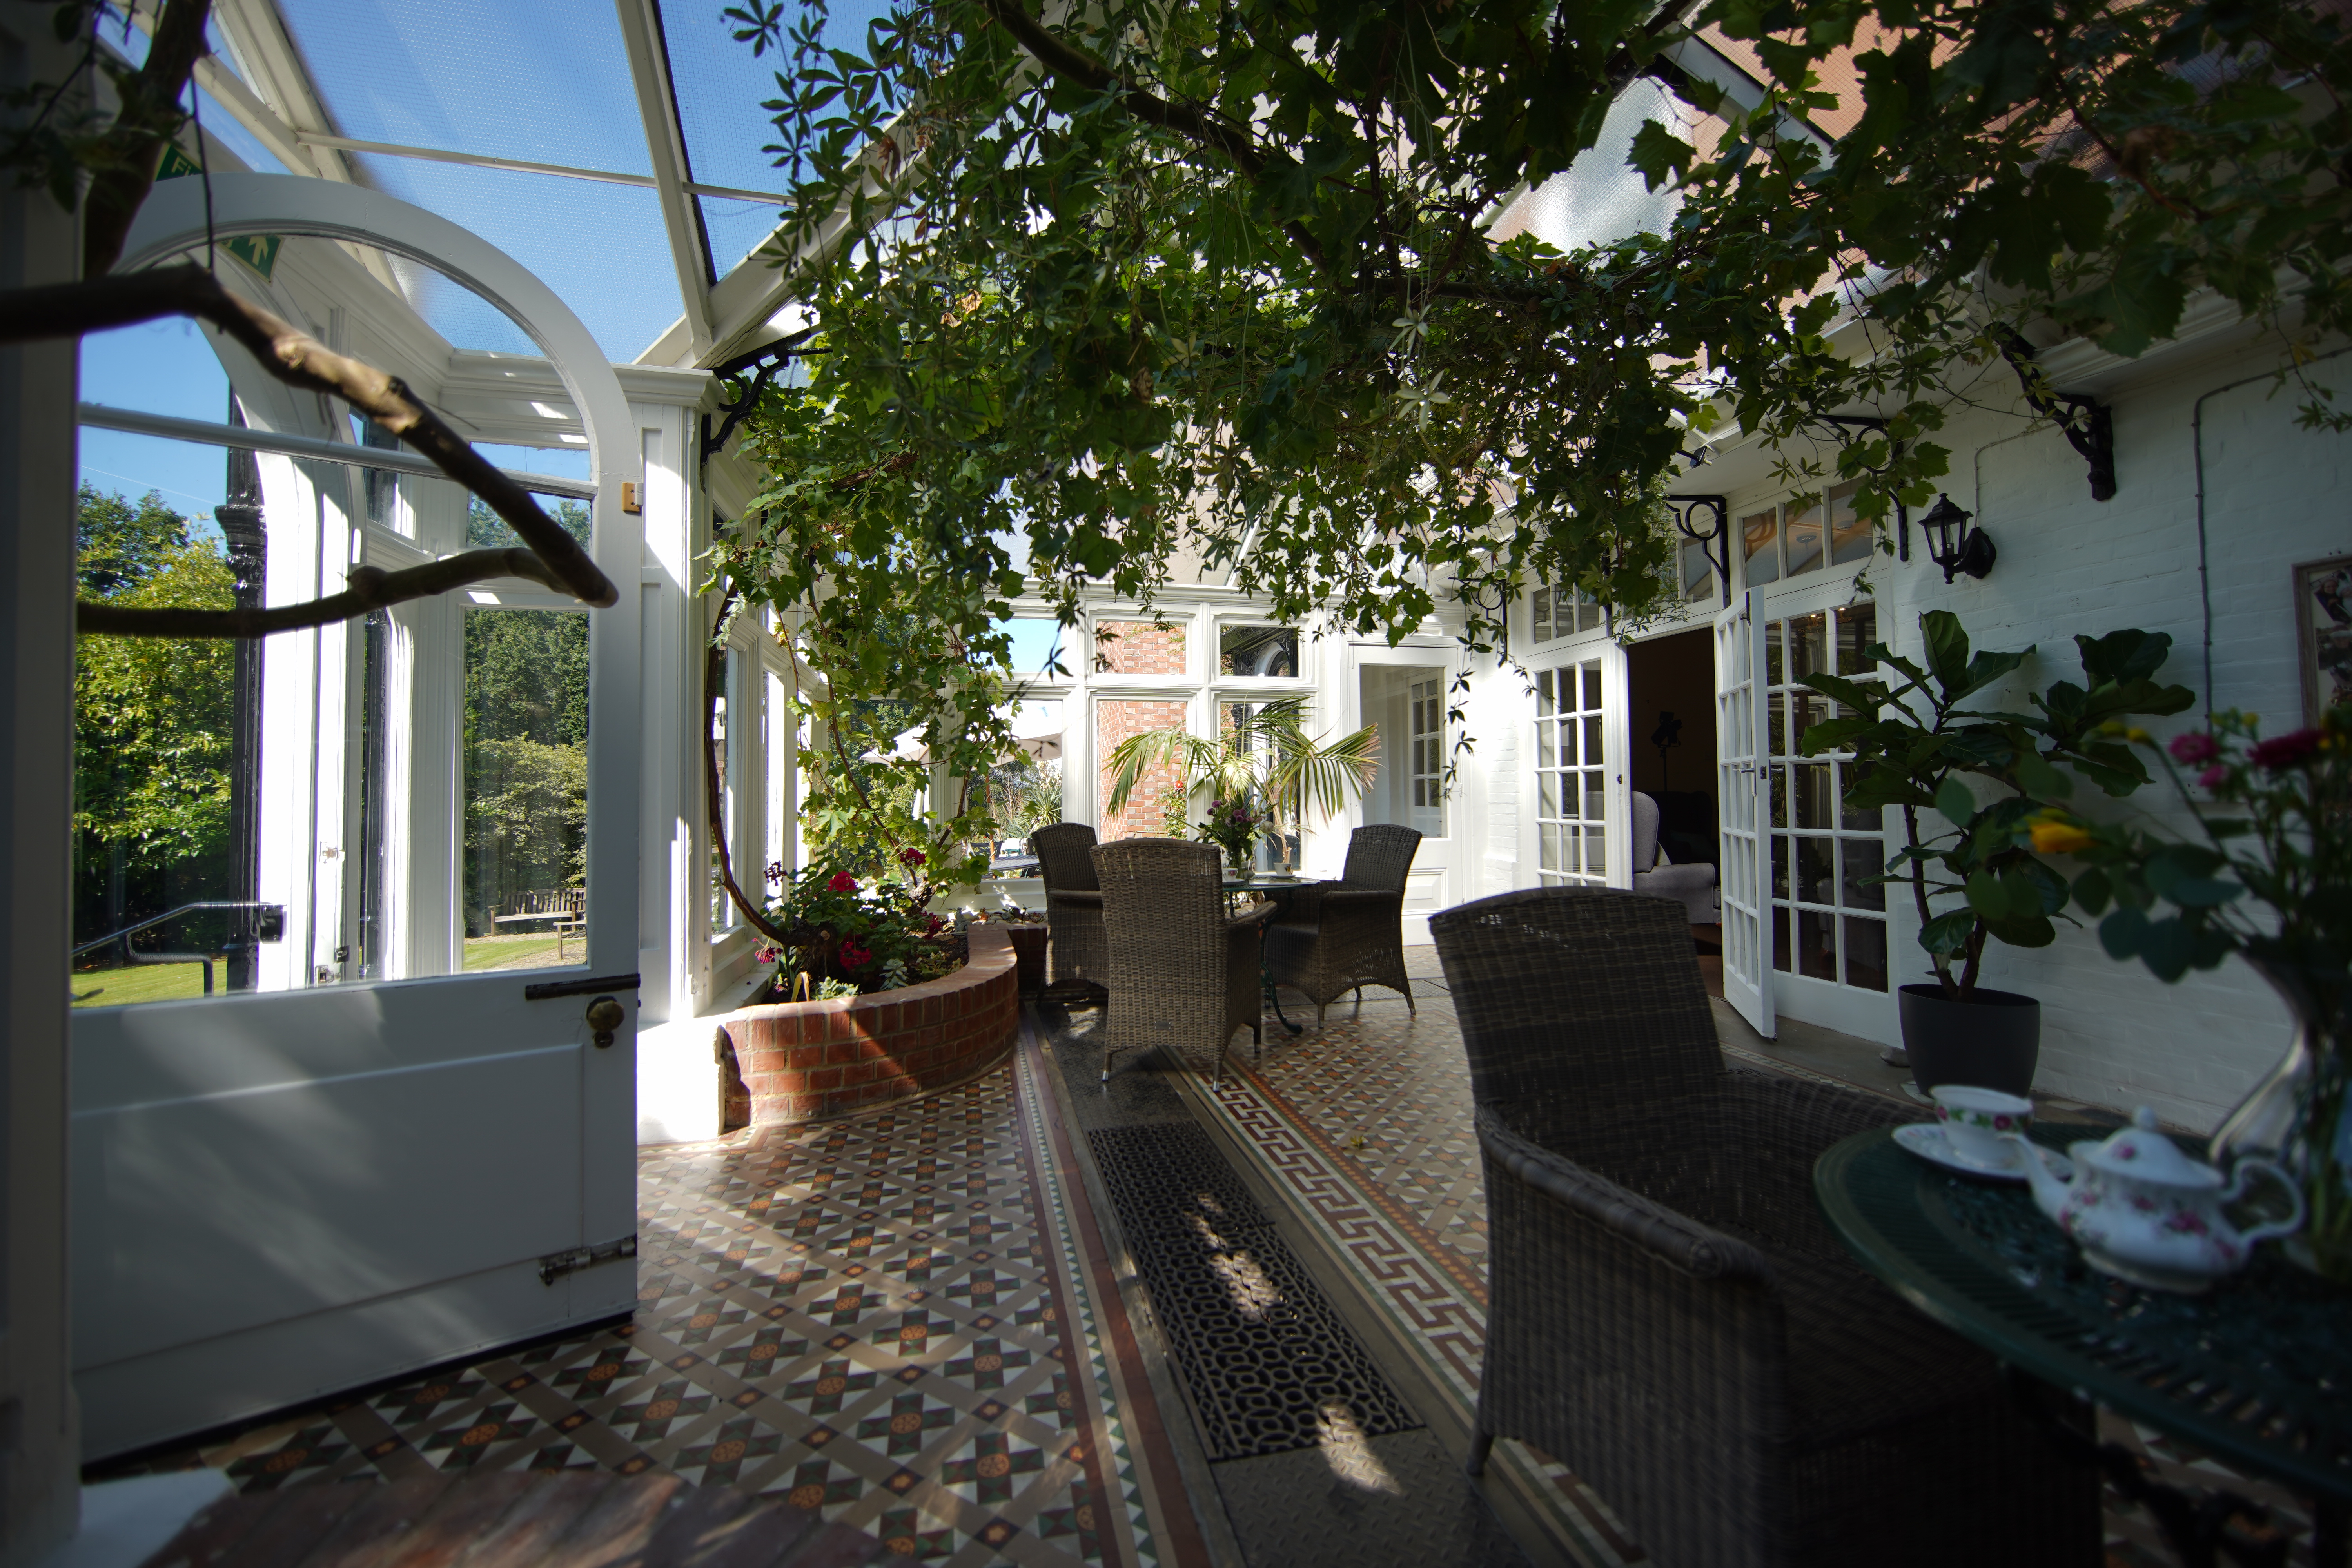 The conservatory at Birchwood House